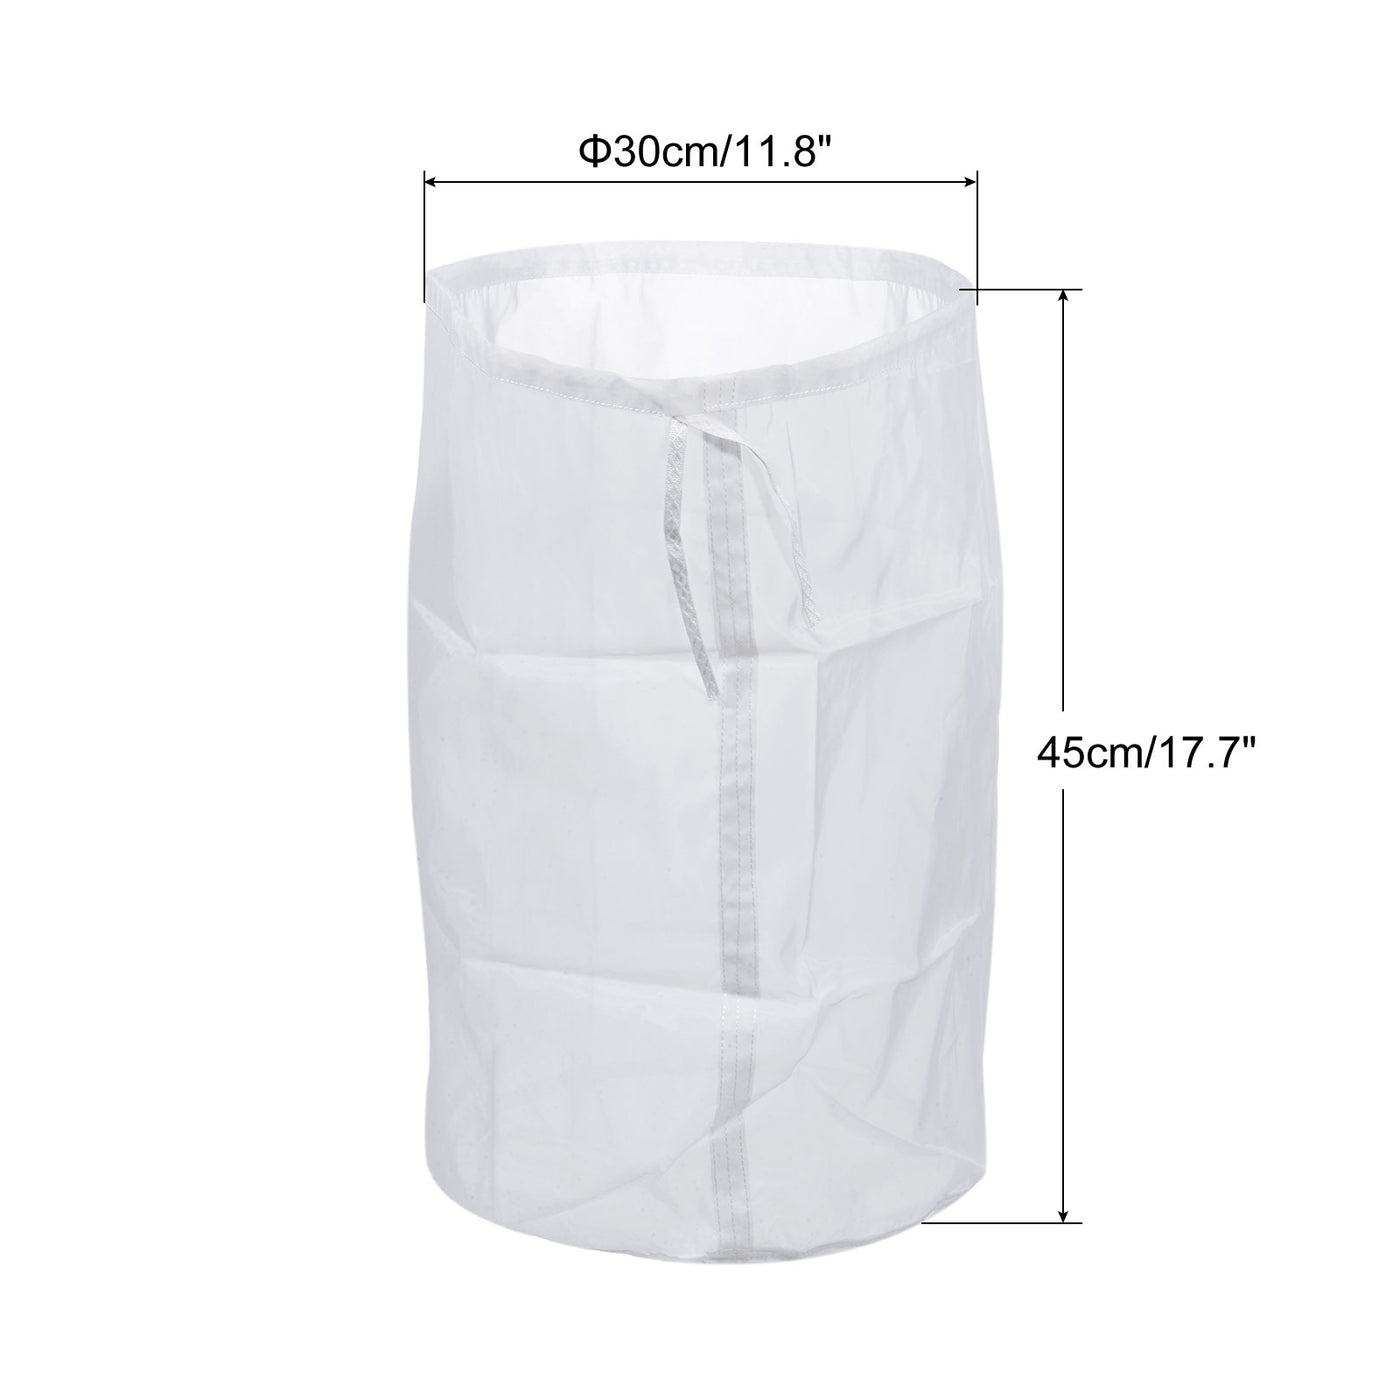 uxcell Uxcell 120 Mesh Paint Filter Bag 11.8" Dia Nylon Strainer with Drawstring for Filtering